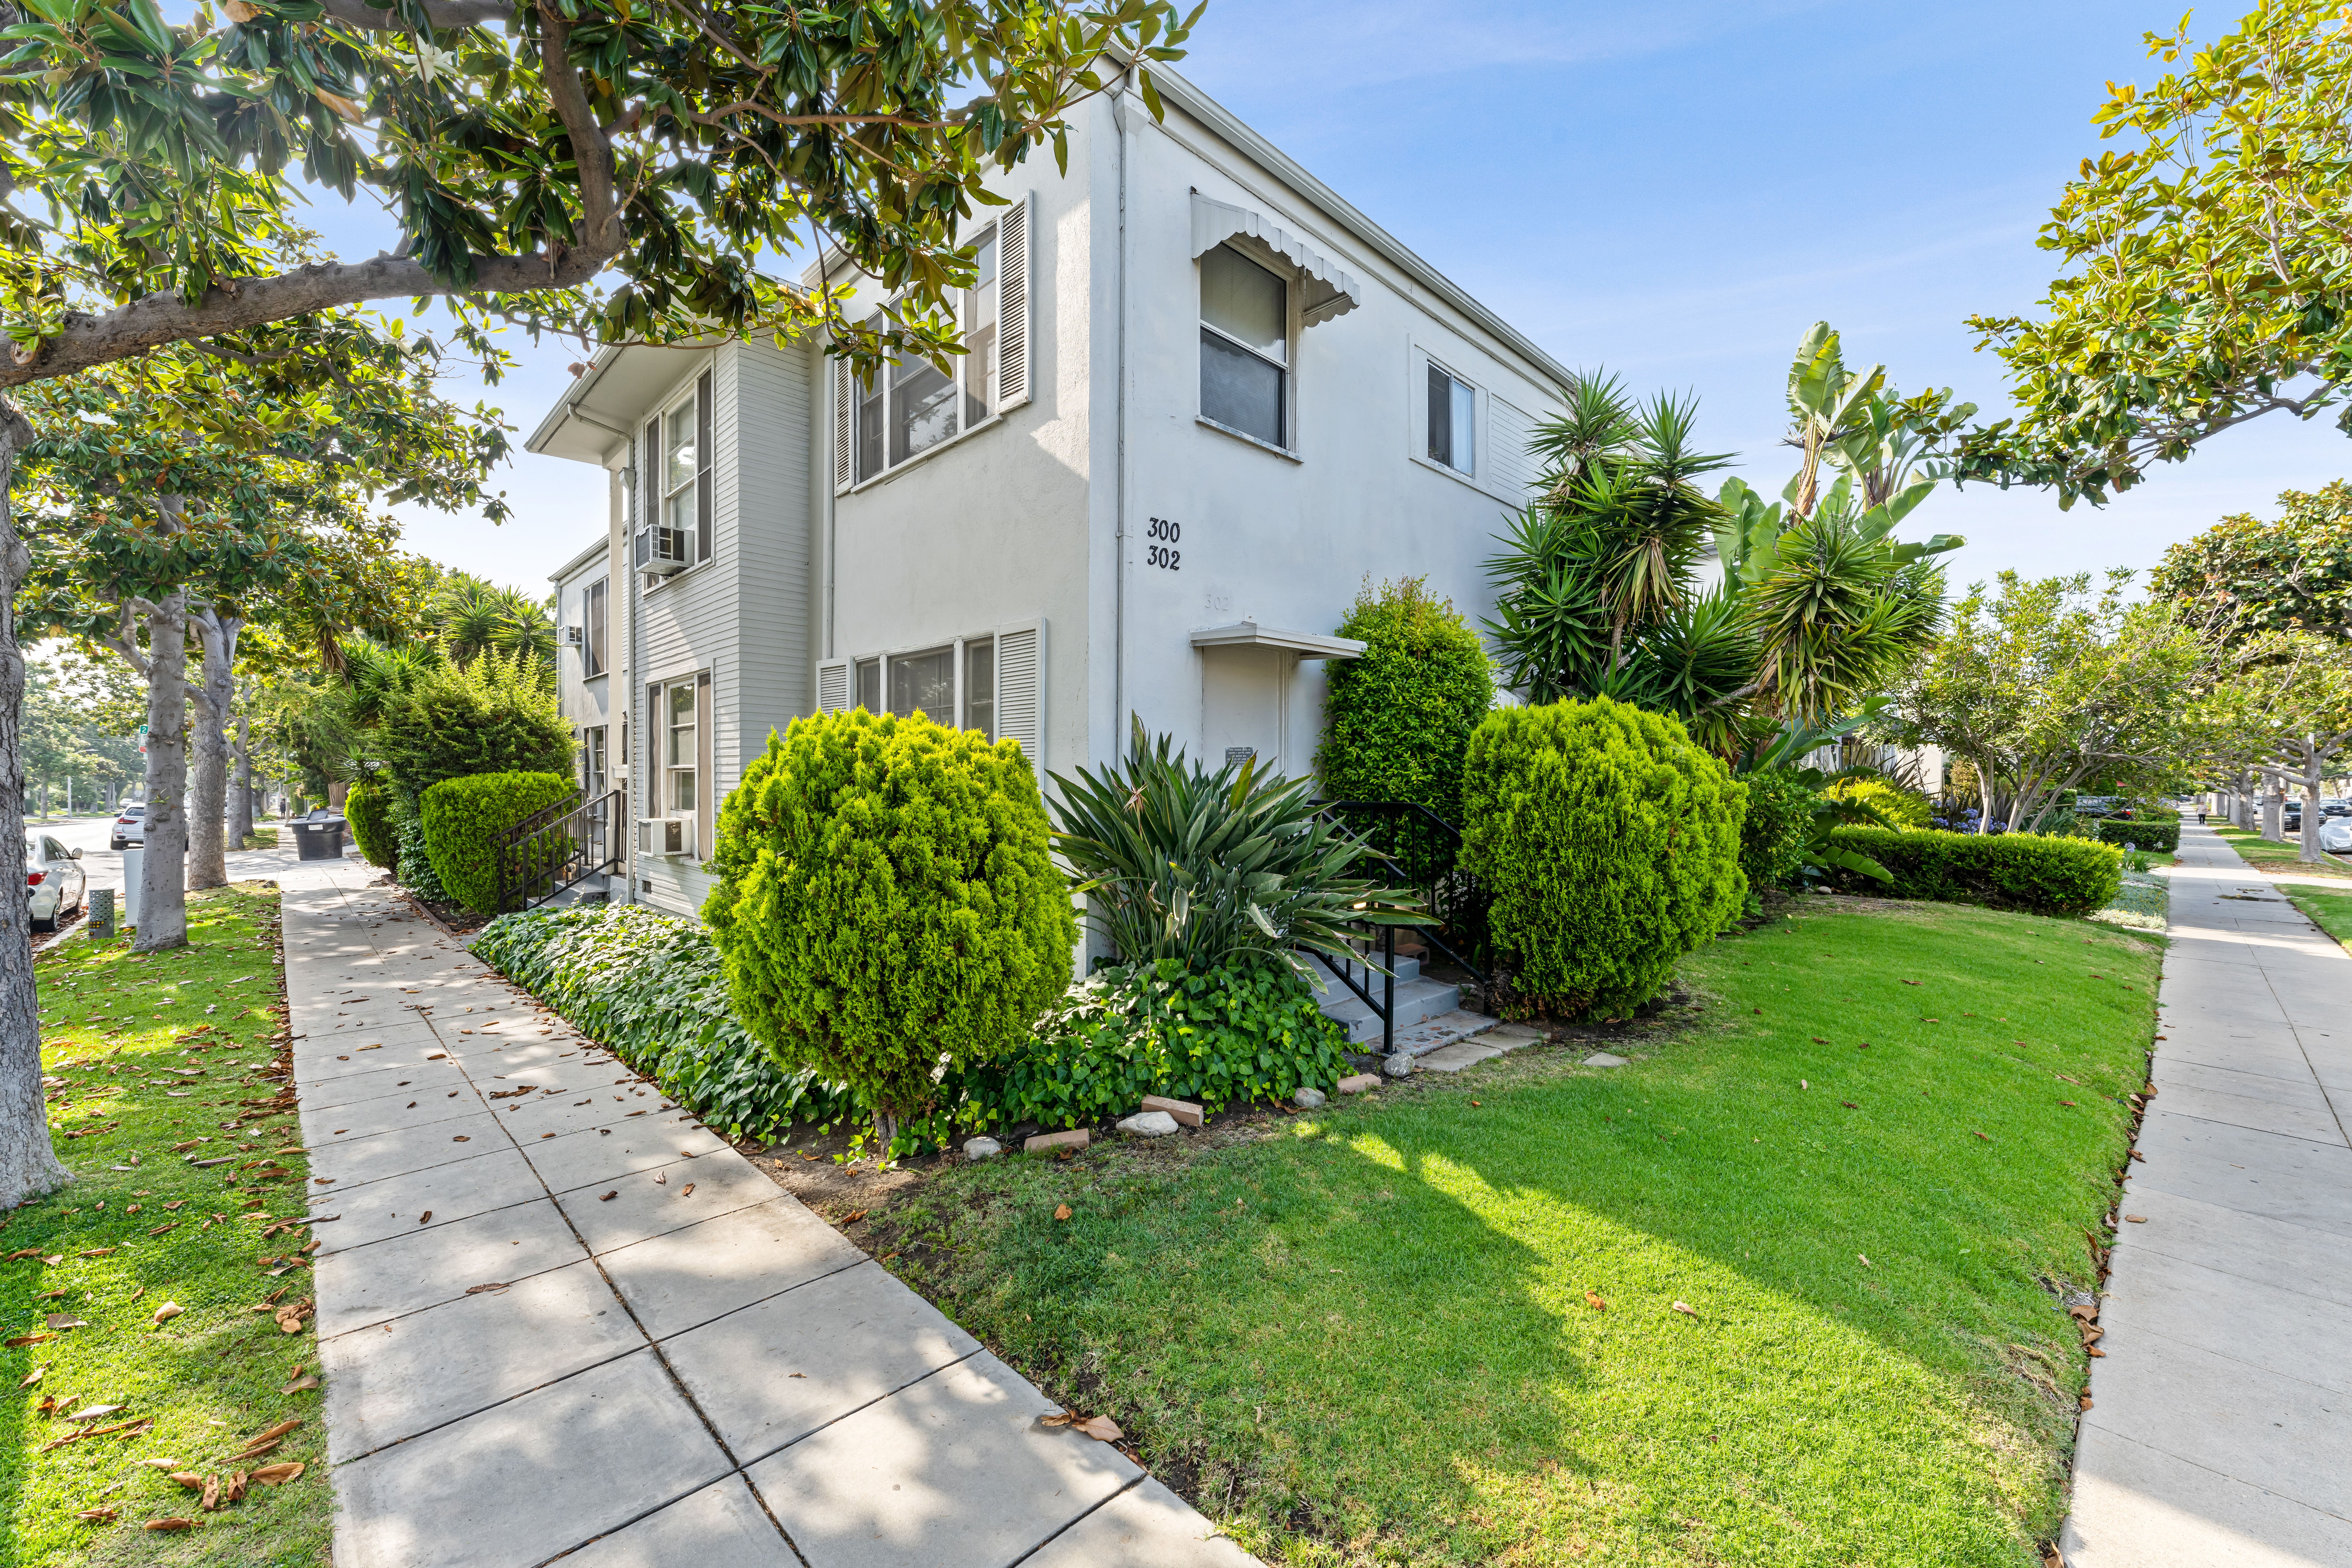 300 S Doheny Dr (17 of 36)